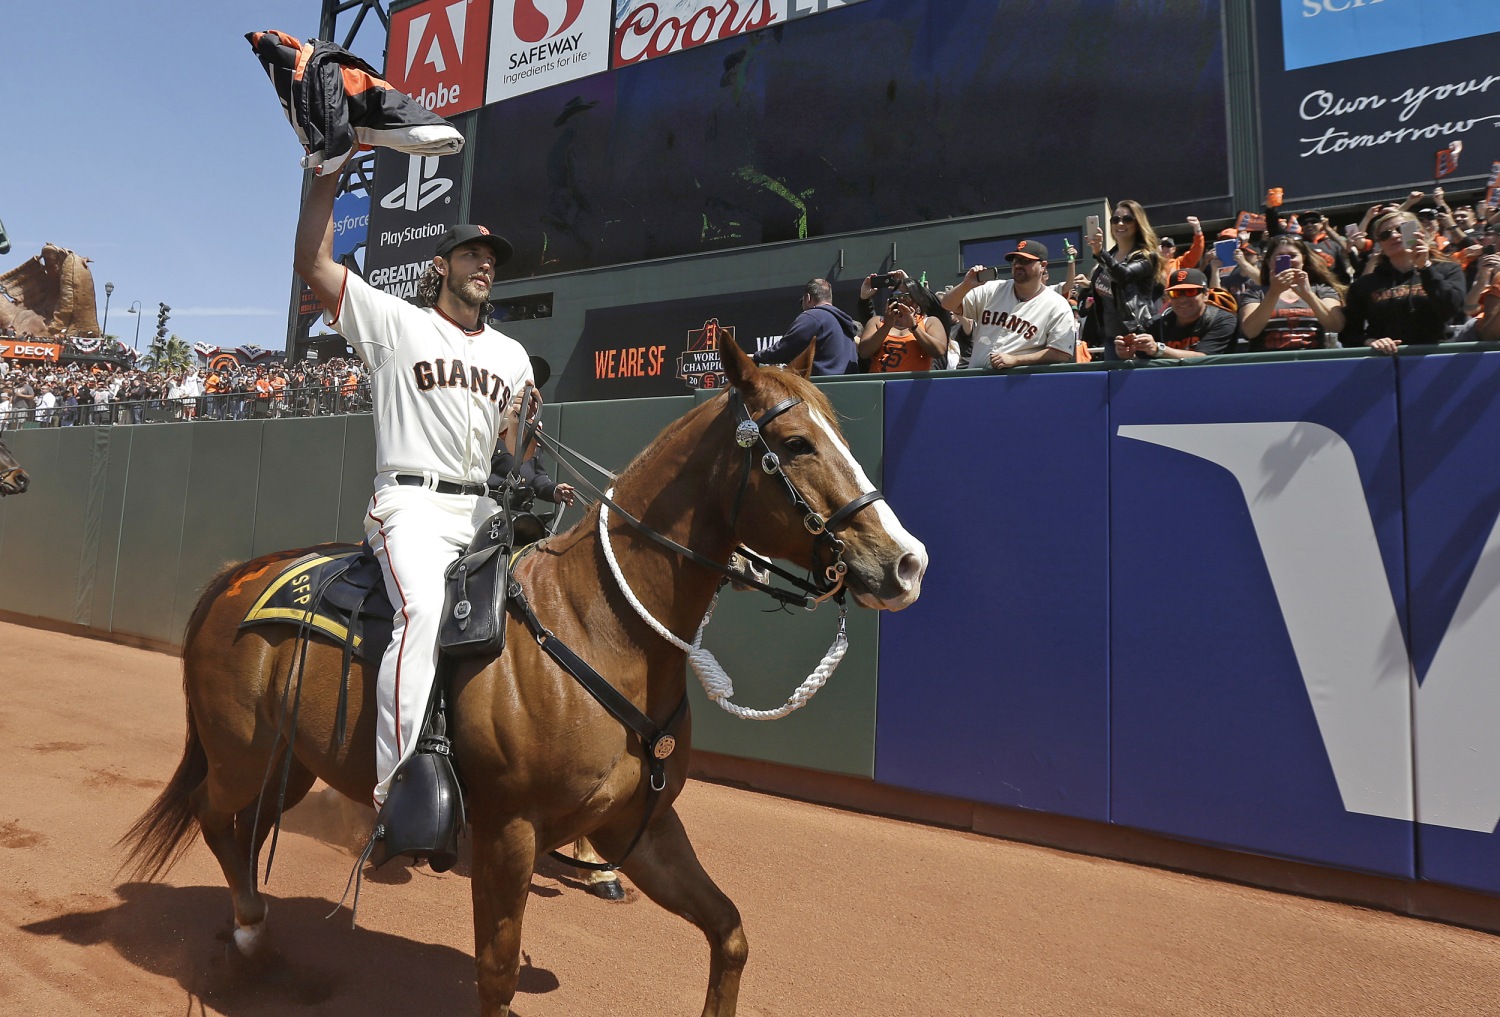 5 Things to Know About World Series Hero Madison Bumgarner